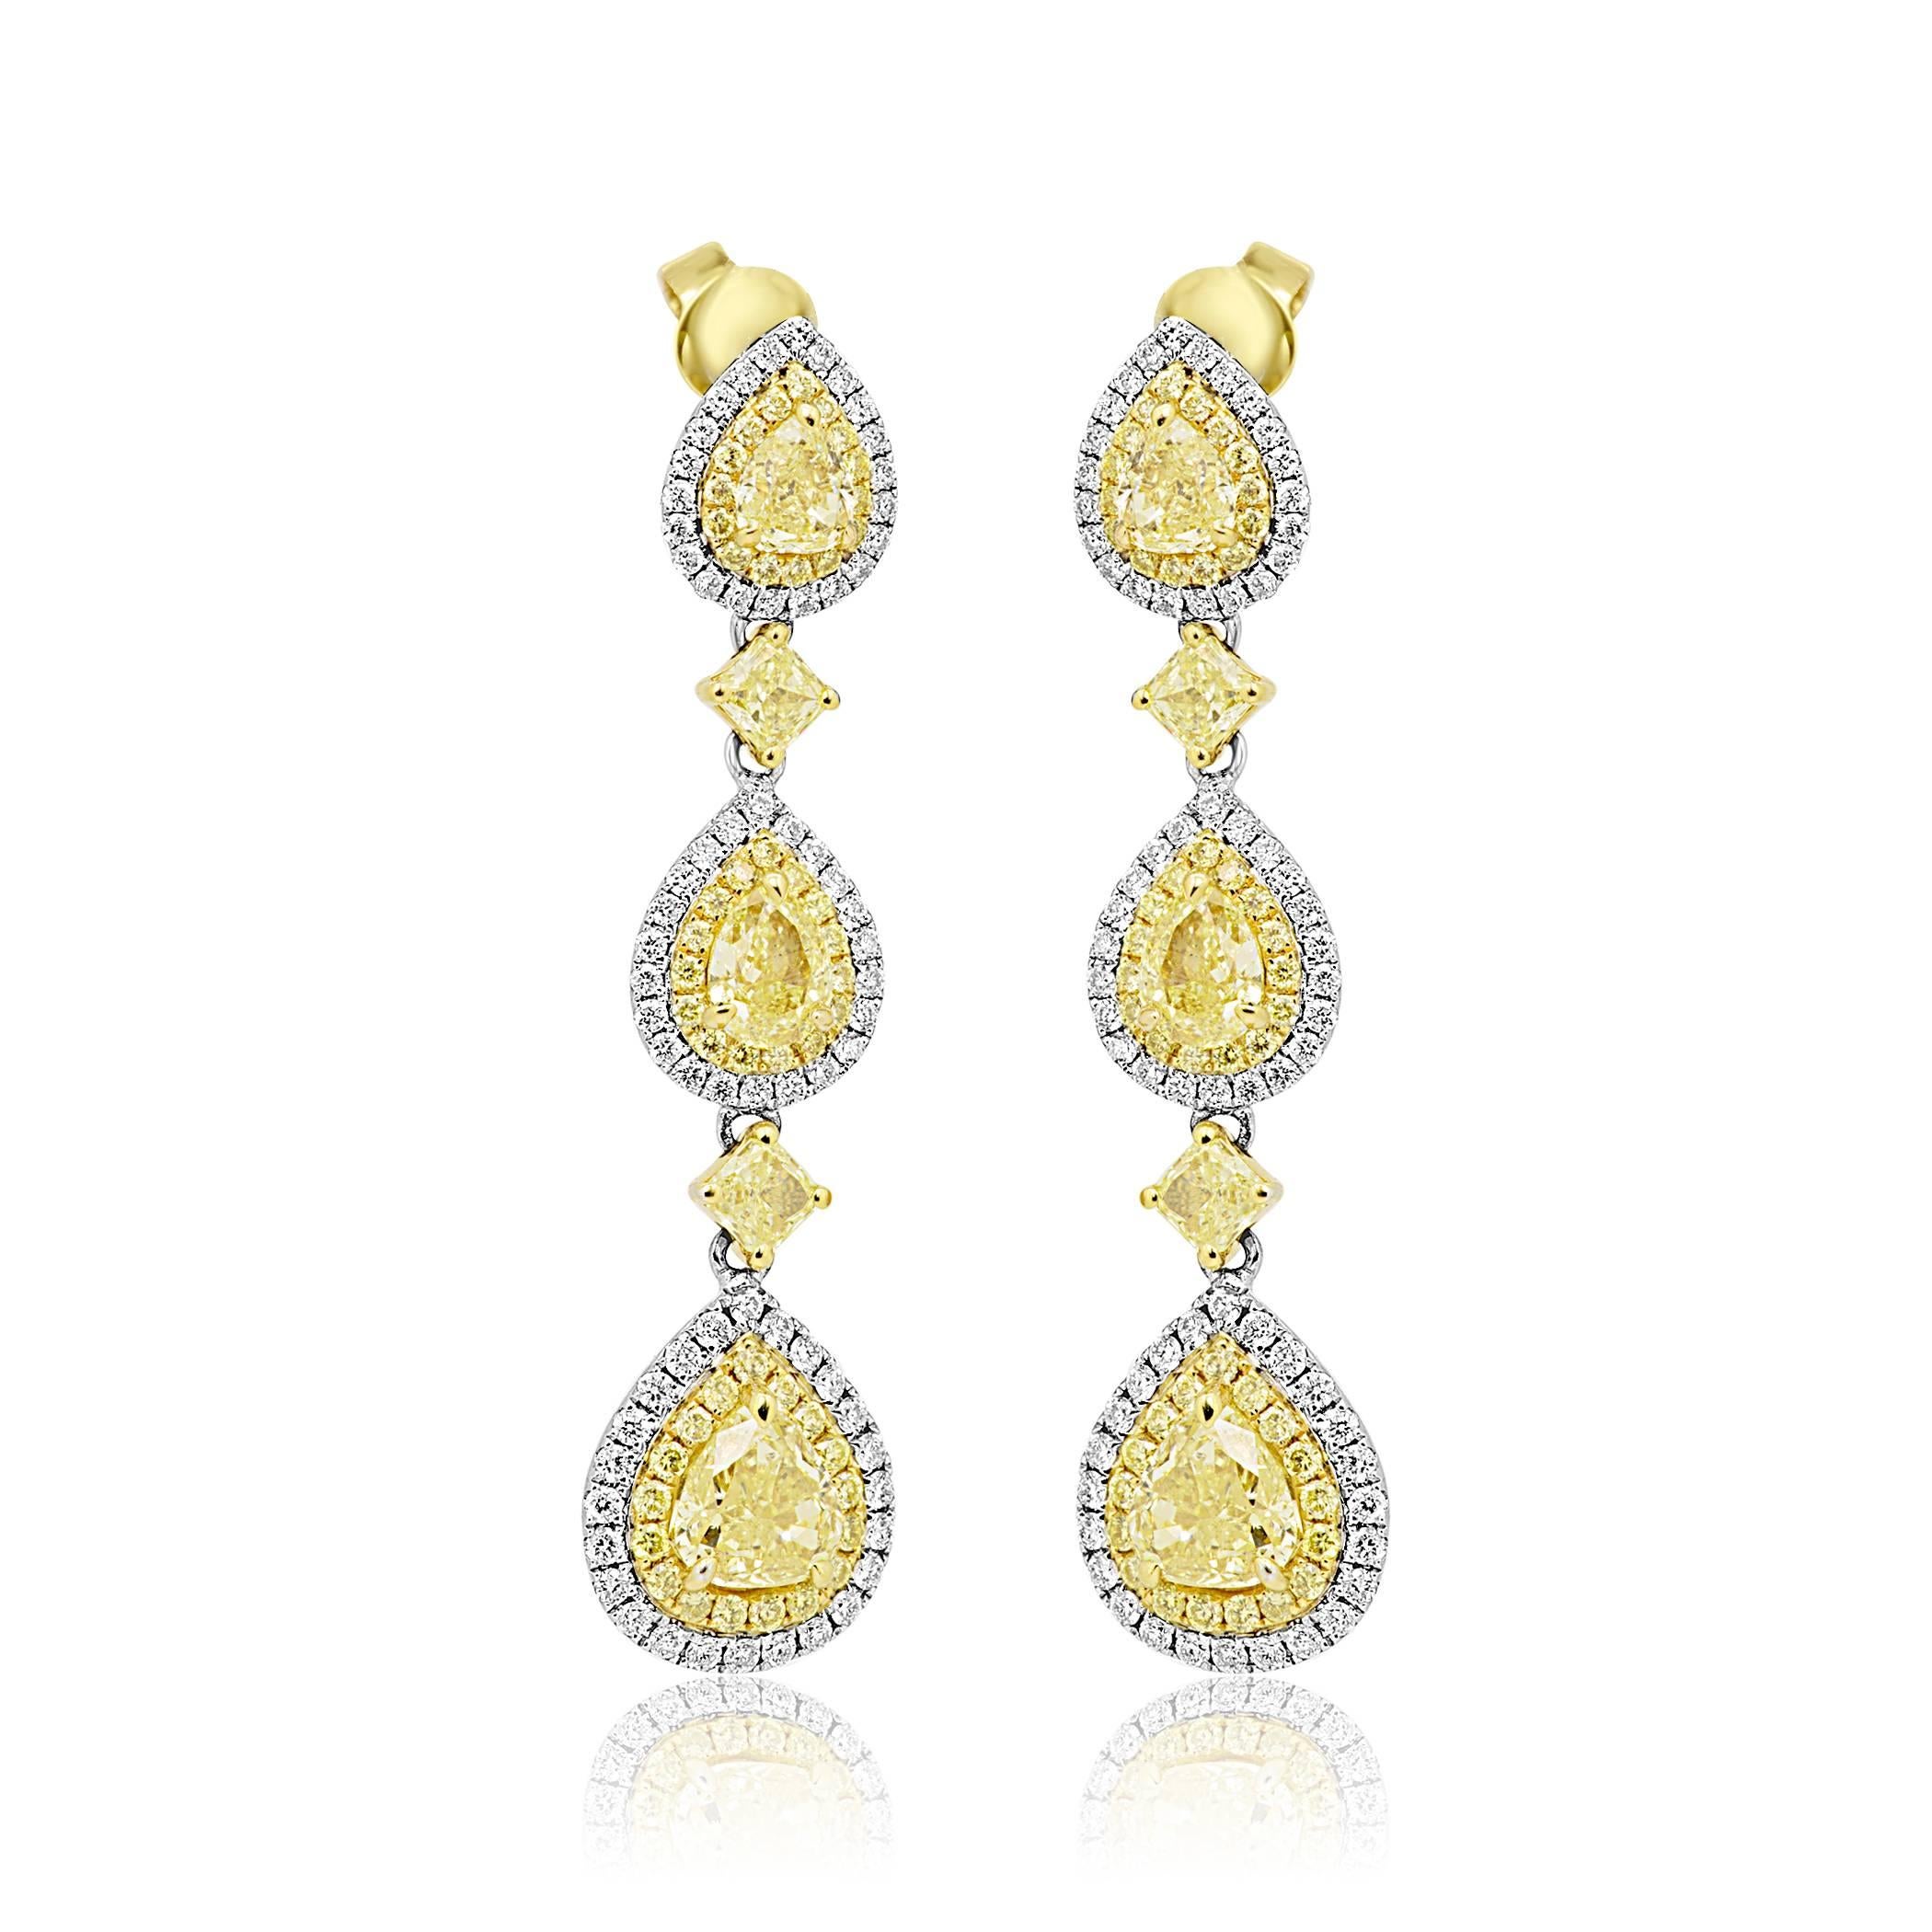 6 Natural Fancy Yellow Pear shape Diamonds 4.52 Carat encircled in halo of  Natural Fancy Yellow Roumd 0.65 Carat and White Diamond Round 0.88 Carat  4 Natural Fancy Yellow Radiant 0.68 Carat in 18K Yellow and White Gold  Earring. 

Style available